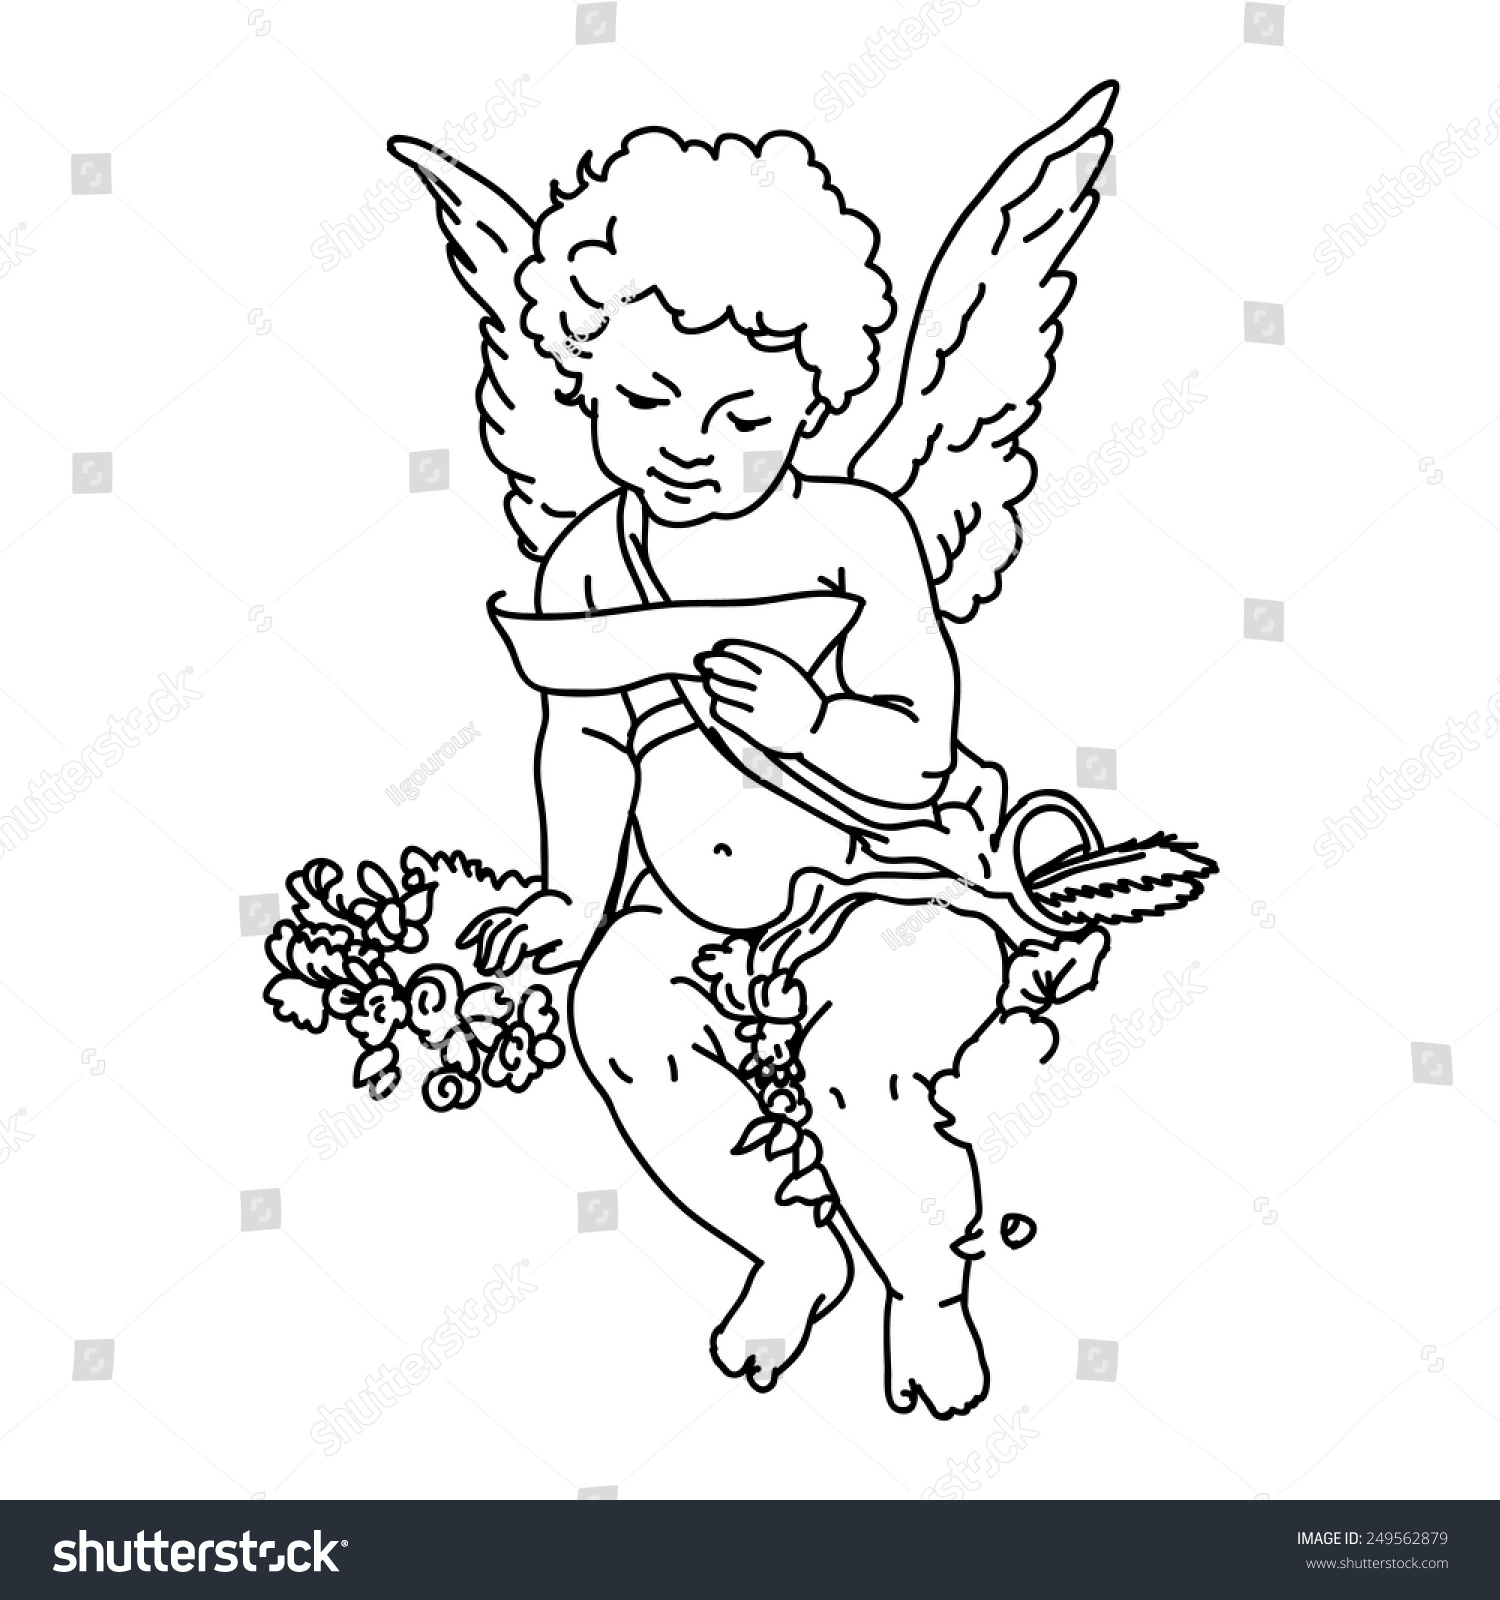 Angel Or Cupid Isolated Hand Drawn Vector Illustration 249562879 Shutterstock 3254